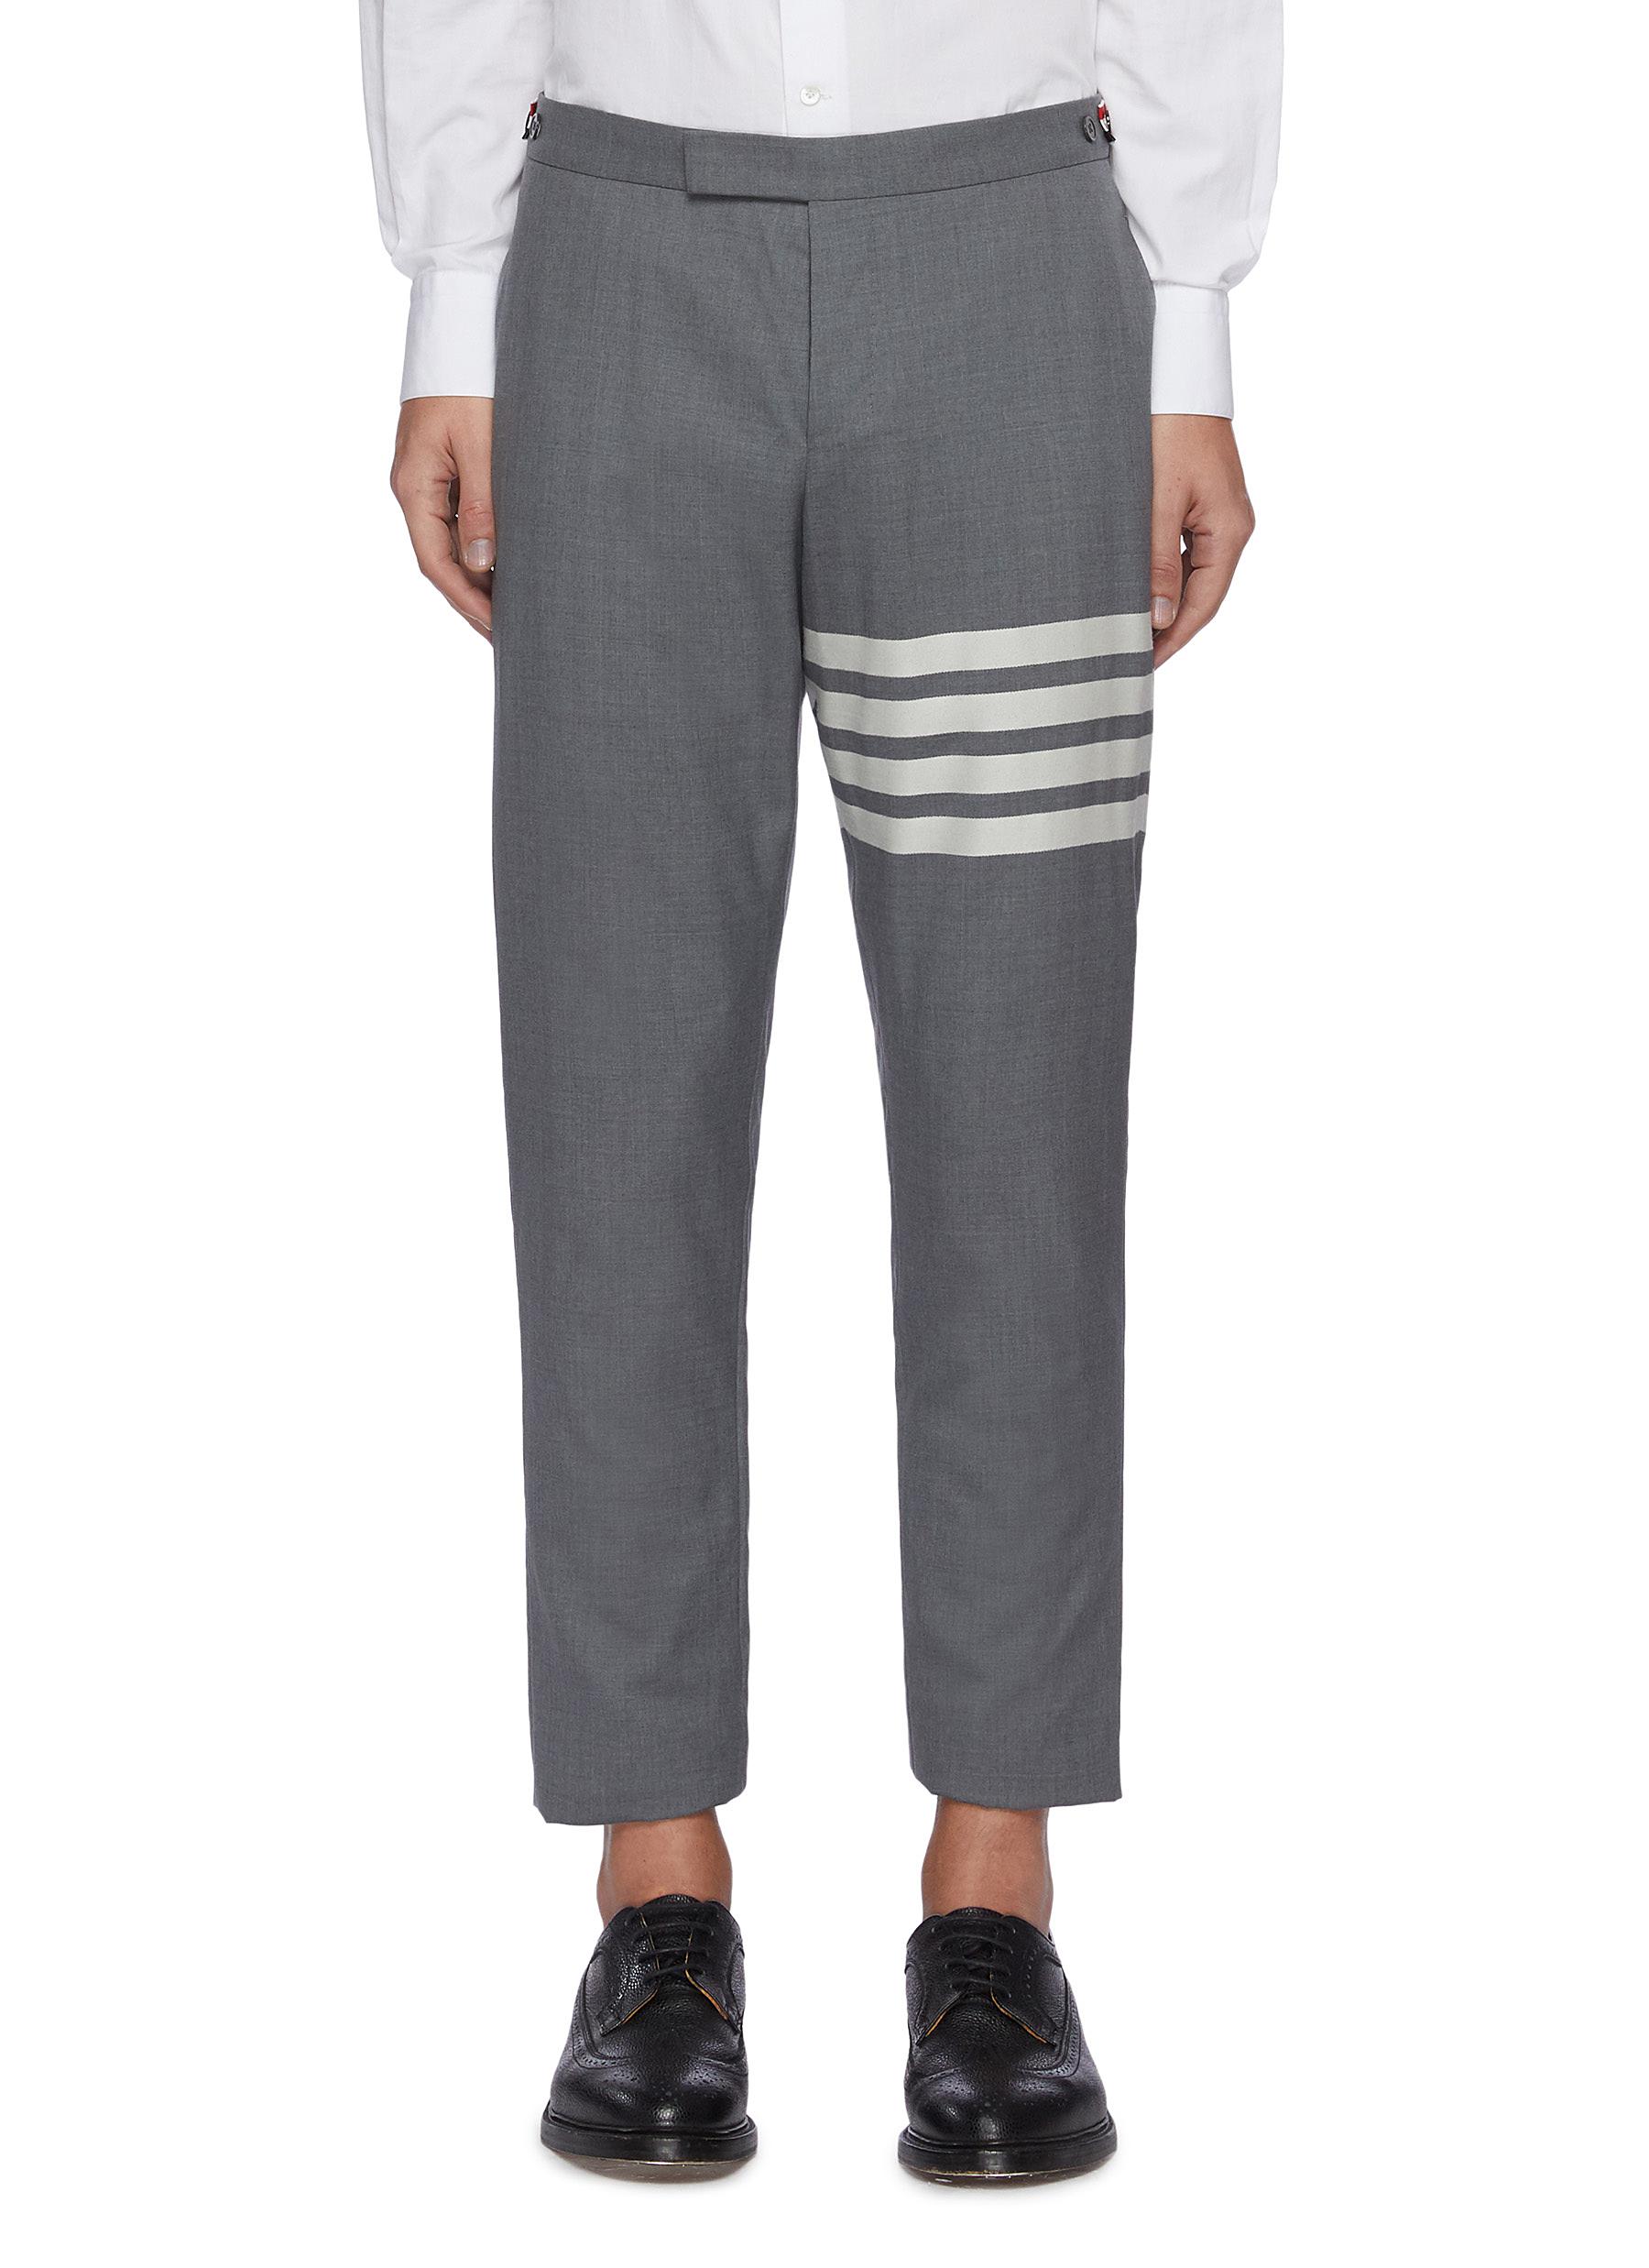 Thom Browne 4 Bar Striped Track Pants Navy, $445, Neiman Marcus